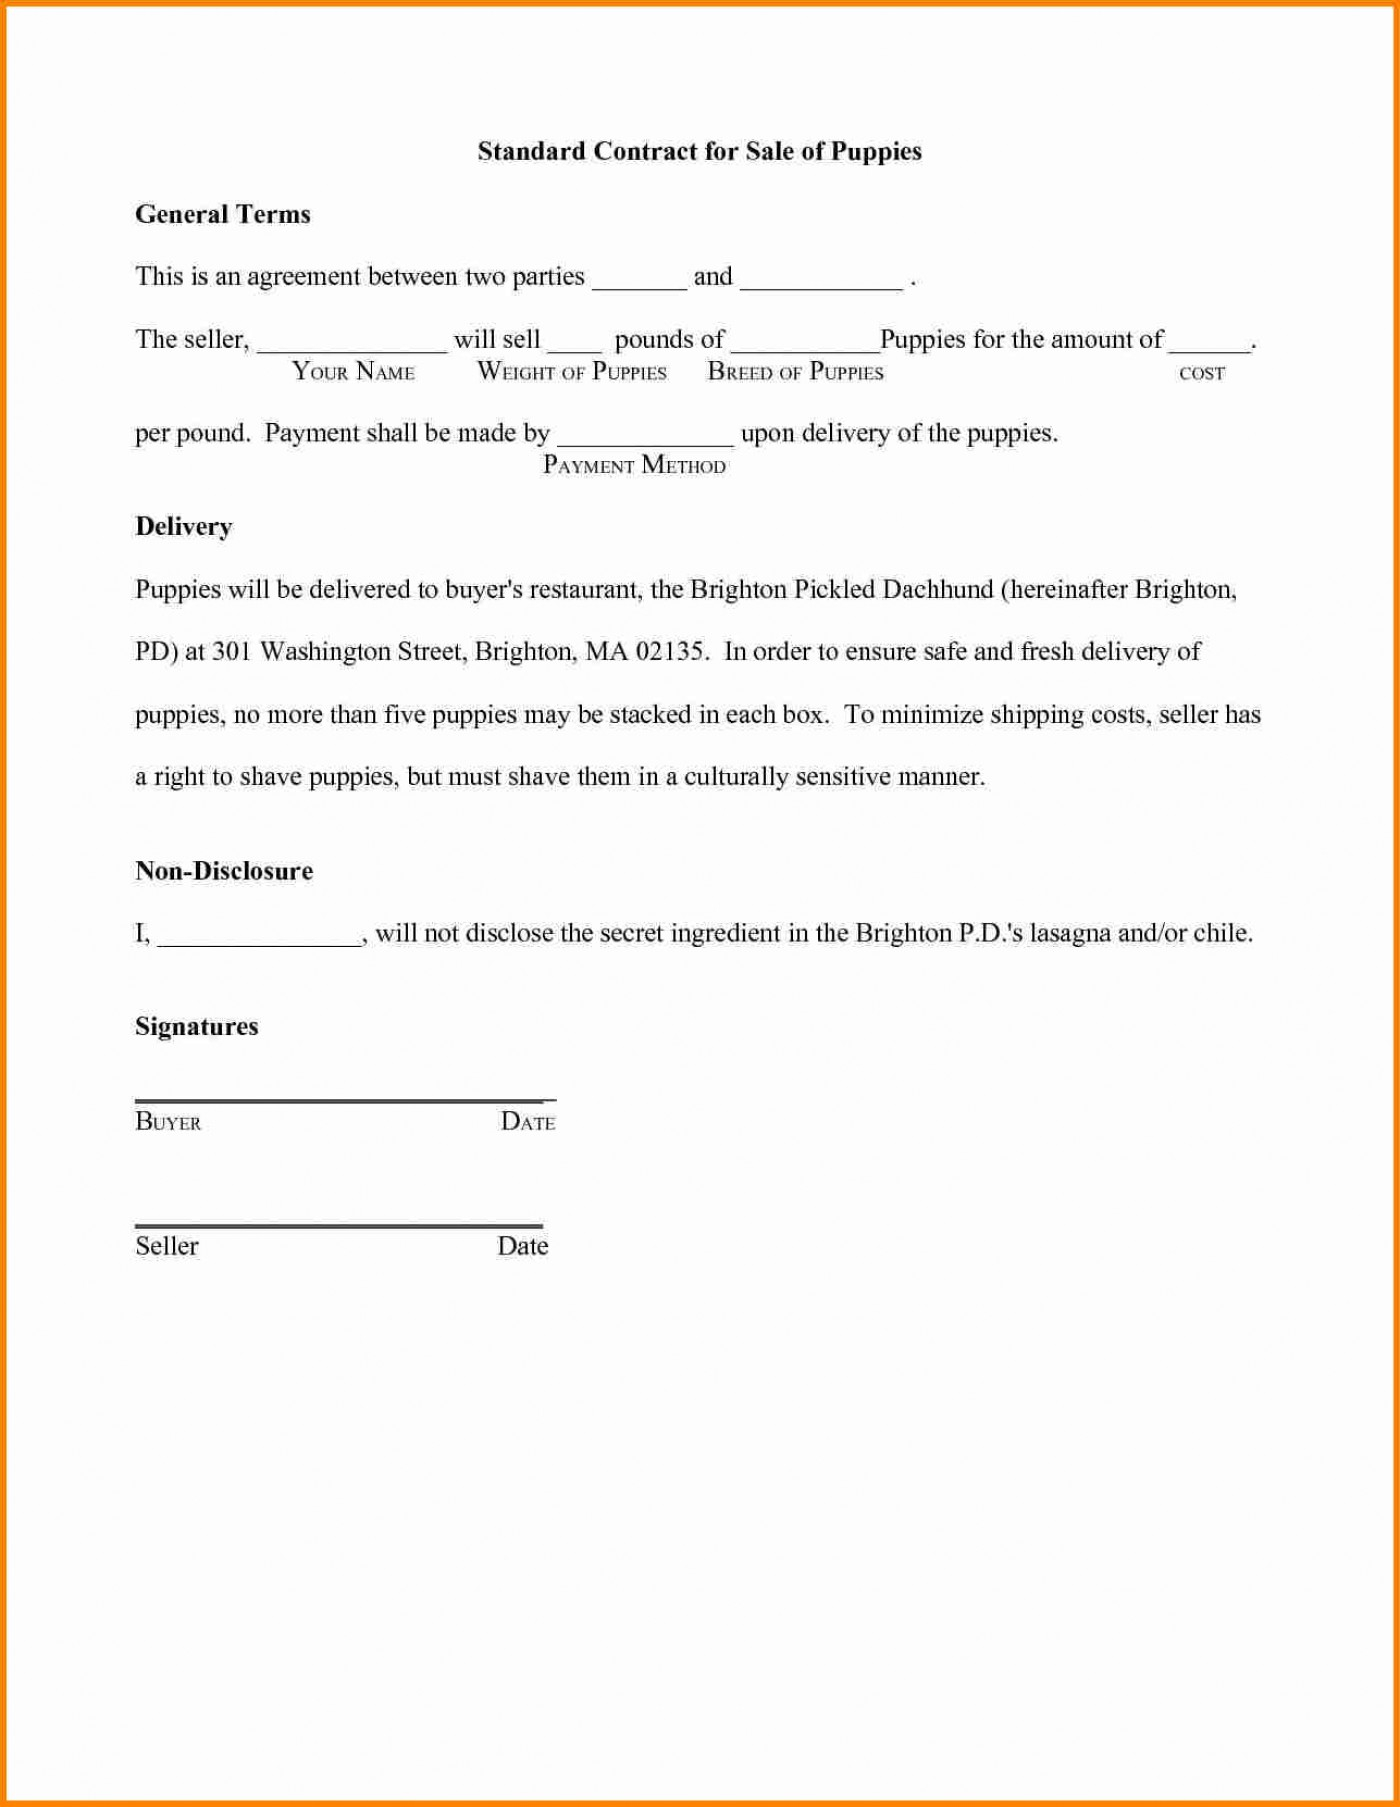 Sample Contract Agreement Between Buyer And Seller 002 Template Ideas Standard Partnership Agreement Of Contract Sample